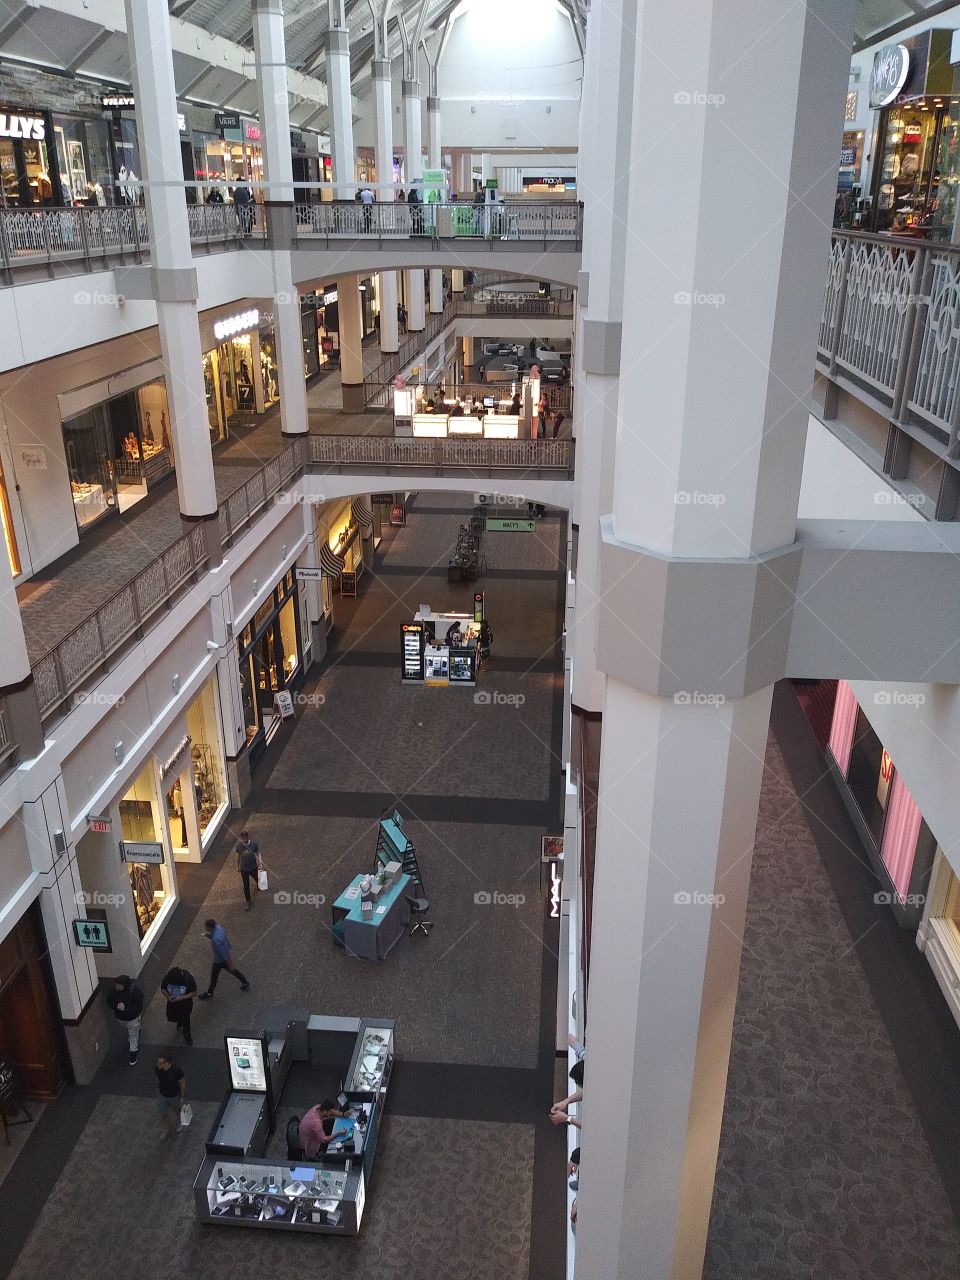 Providence place Mall